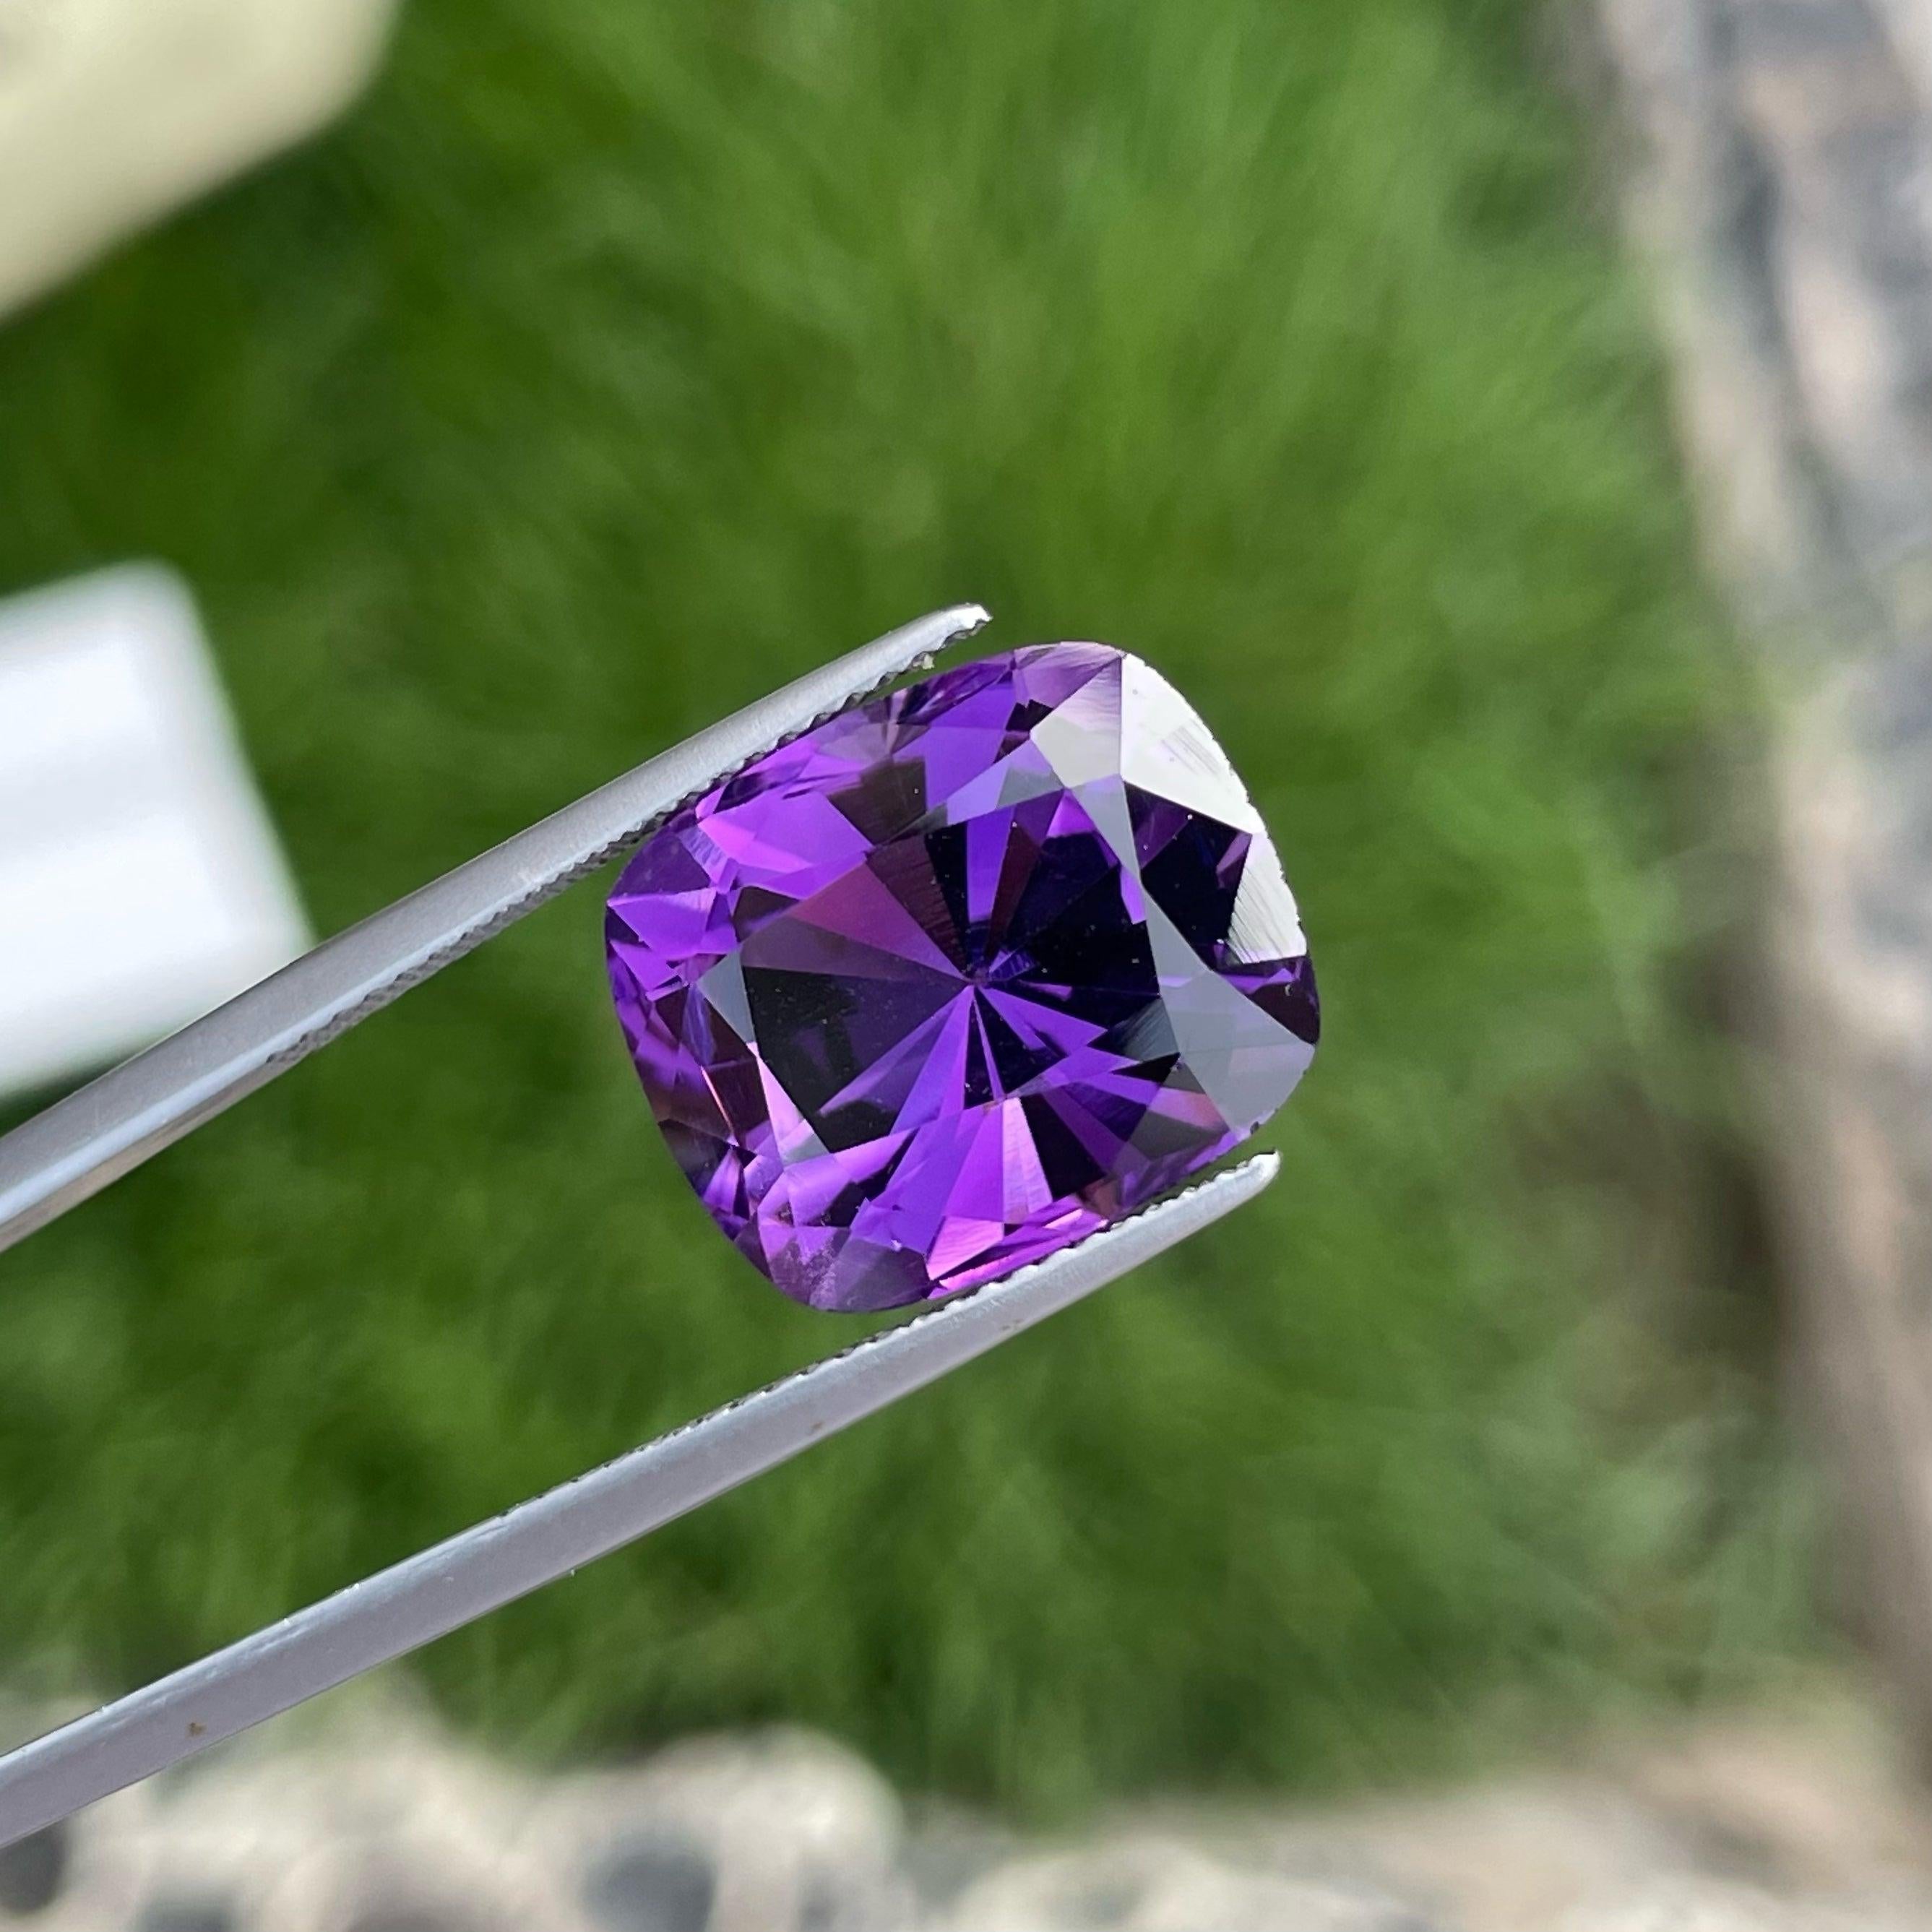 Natural Gorgeous Amethyst Gem, available for sale, natural high quality flawless 10.25 carats, faceted Cushion Cut, certified amethyst from Brazil.

 Product Information:
GEMSTONE TYPE	Natural Gorgeous Amethyst Gem
WEIGHT	10.25